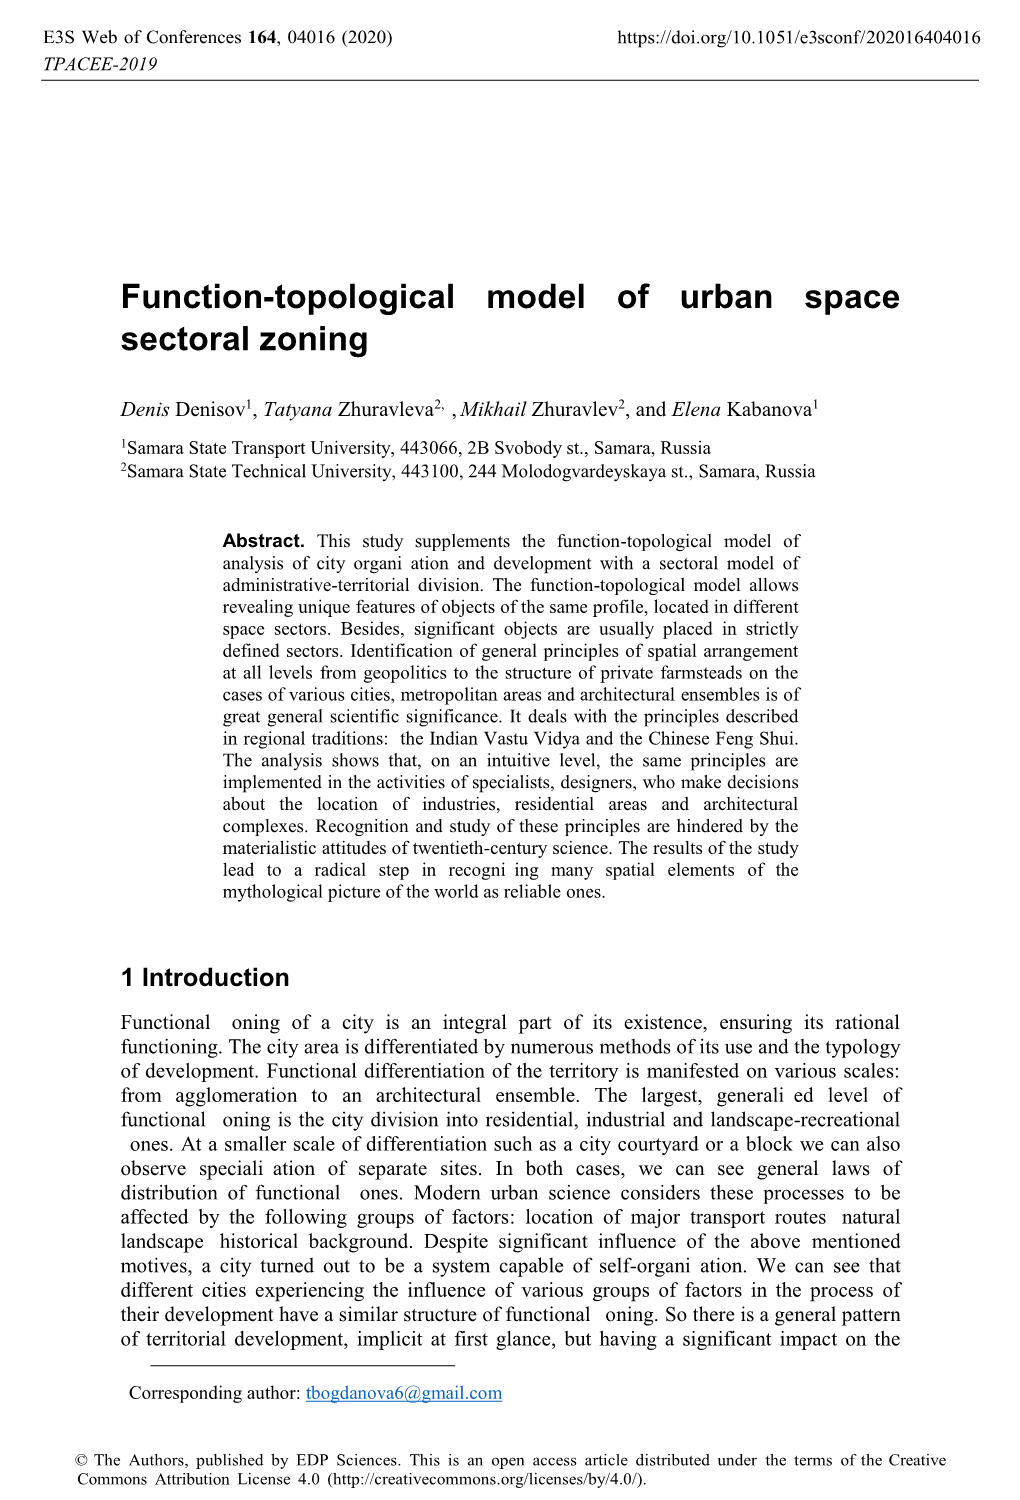 Function-Topological Model of Urban Space Sectoral Zoning